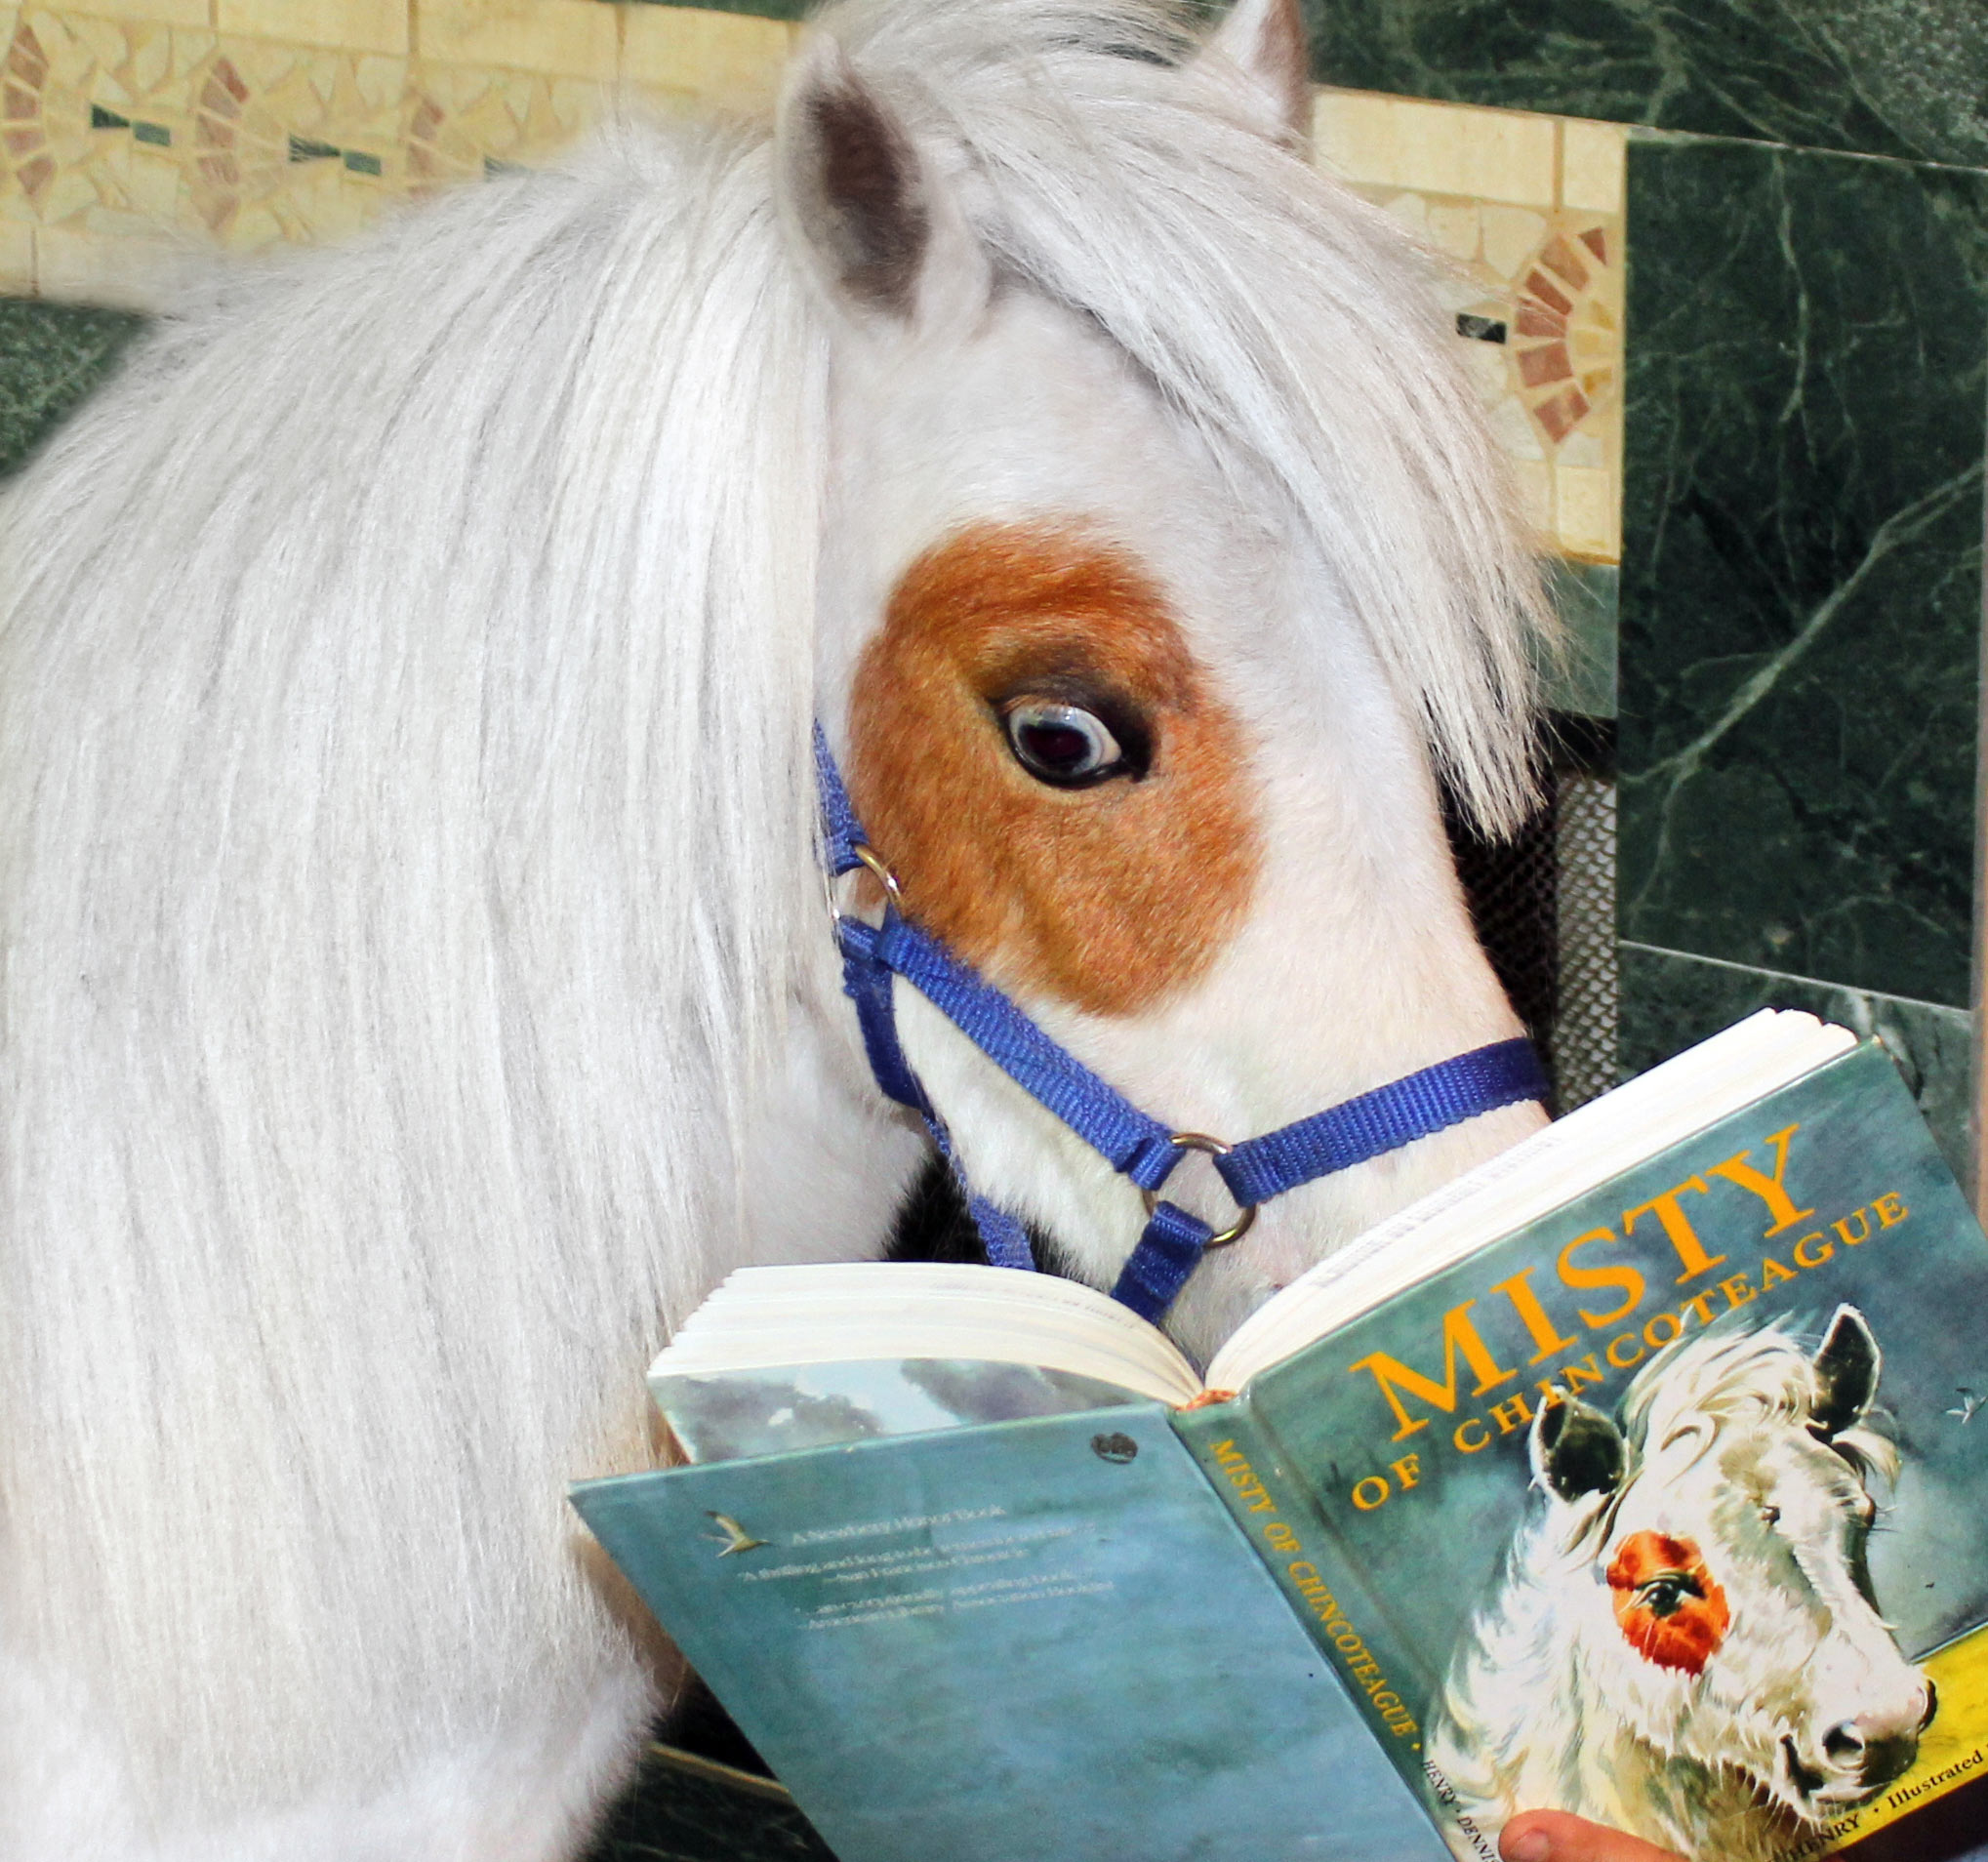 Misty checking out the book "Misty of Chincoteague".